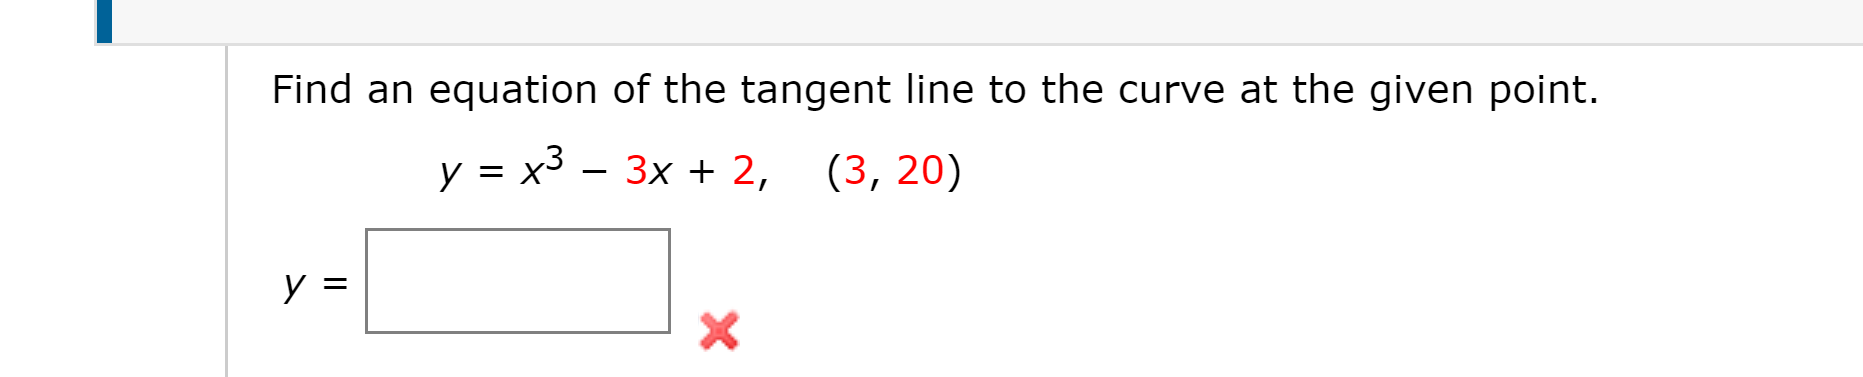 Find an equation of the tangent line to the curve at the given point.
y = x3 – 3x + 2, (3, 20)
